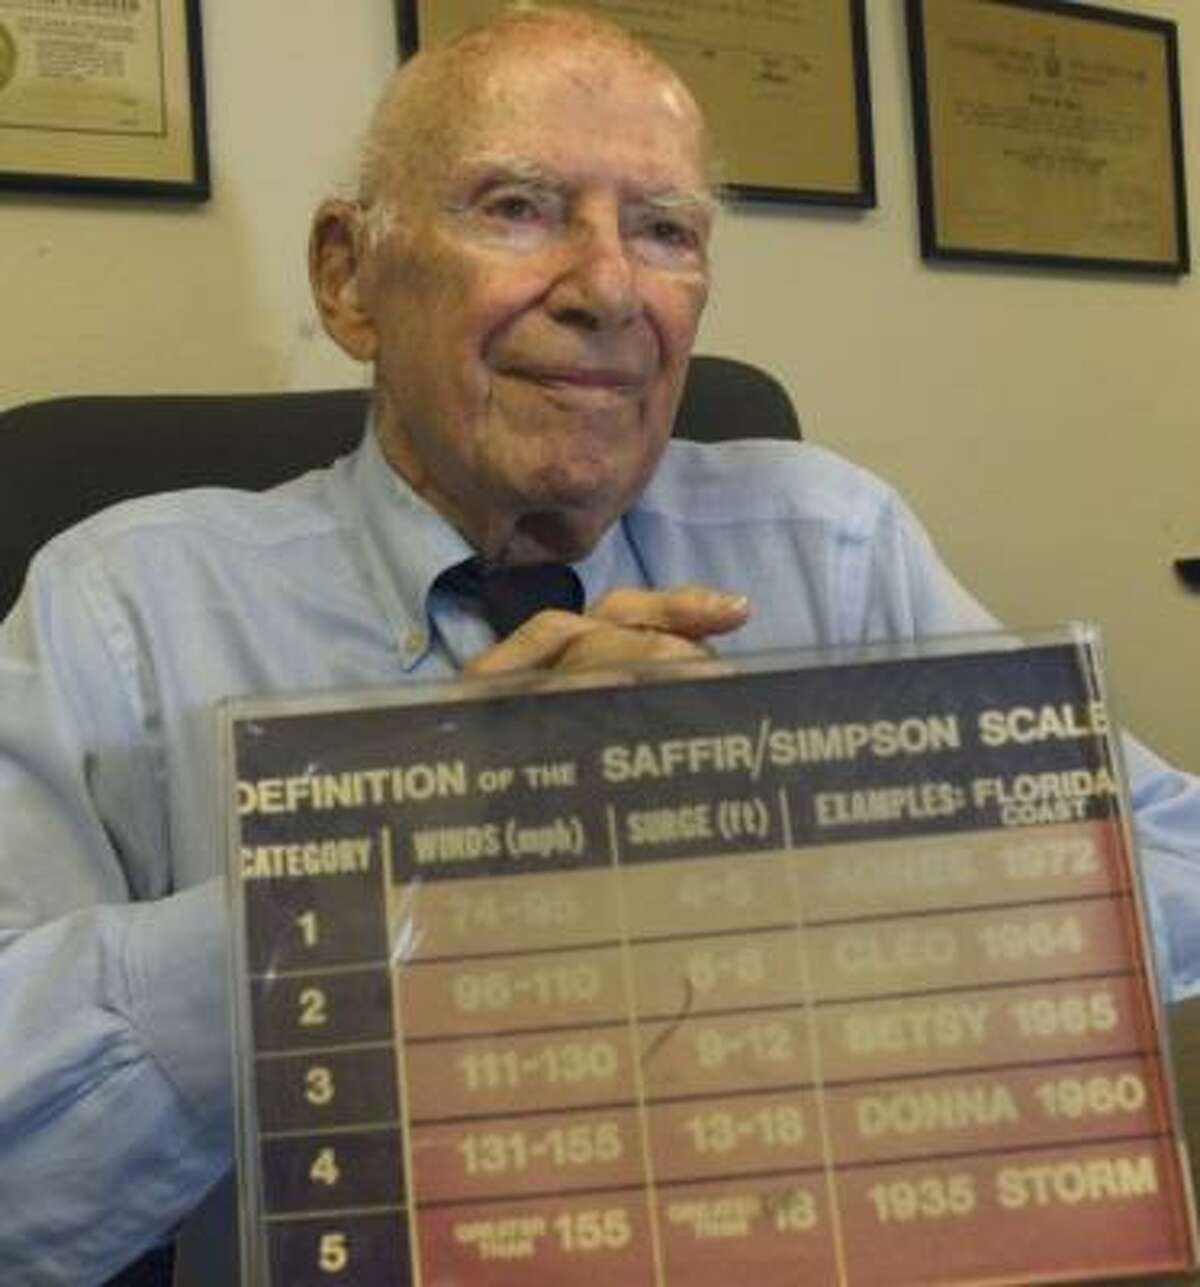 Herbert Saffir displays an old copy of the Saffir-Simpson Scale at his Florida office in July. Saffir, an engineer, co-created the scale to concisely describe a storm's strength and warn the public.